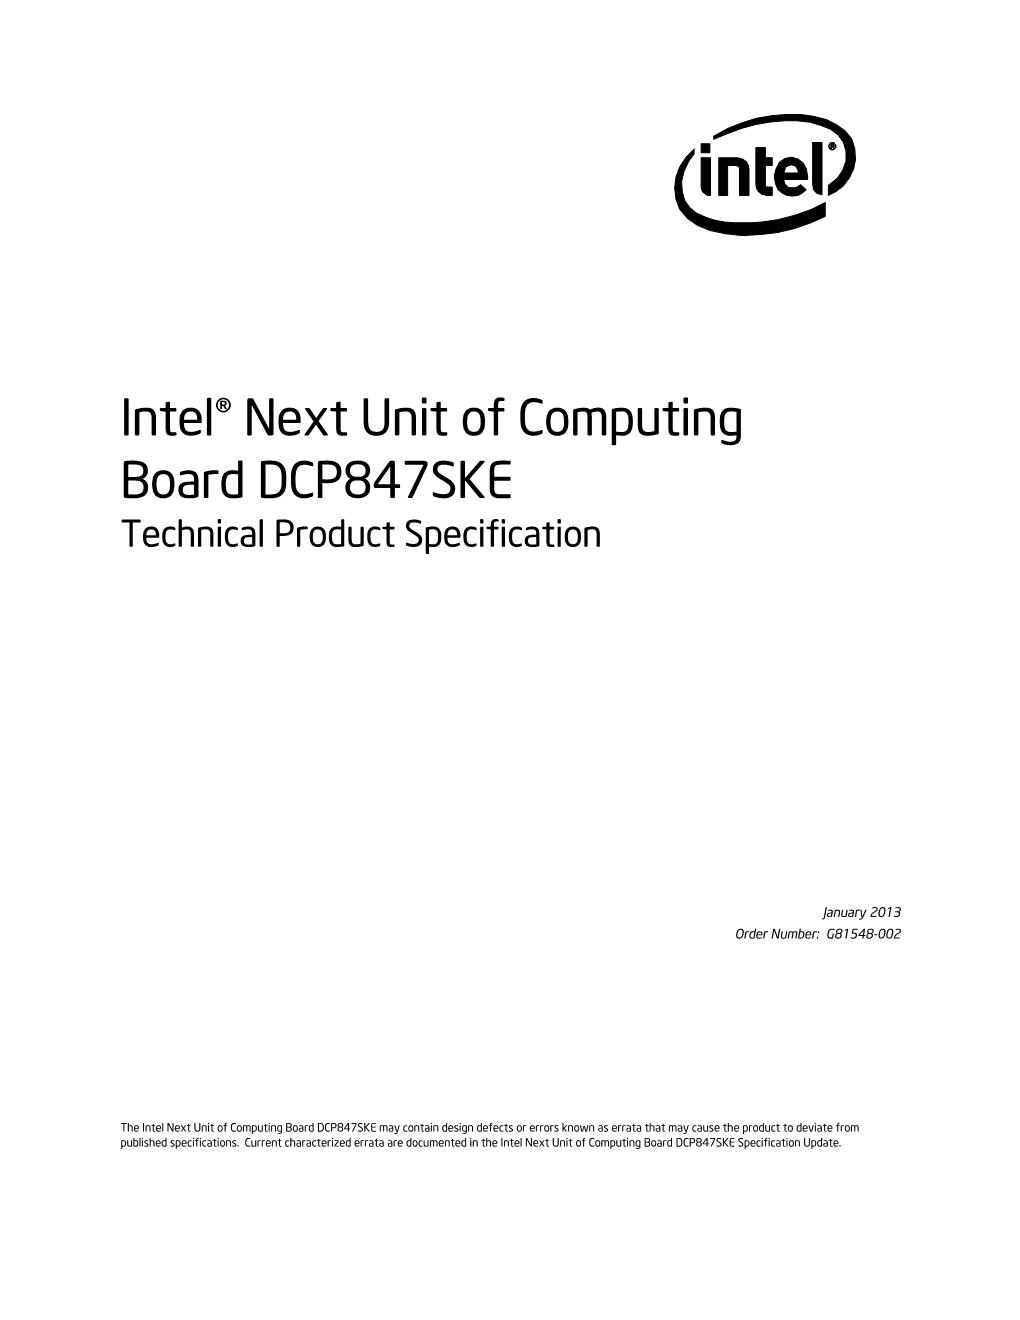 Intel® Next Unit of Computing Board DCP847SKE Technical Product Specification